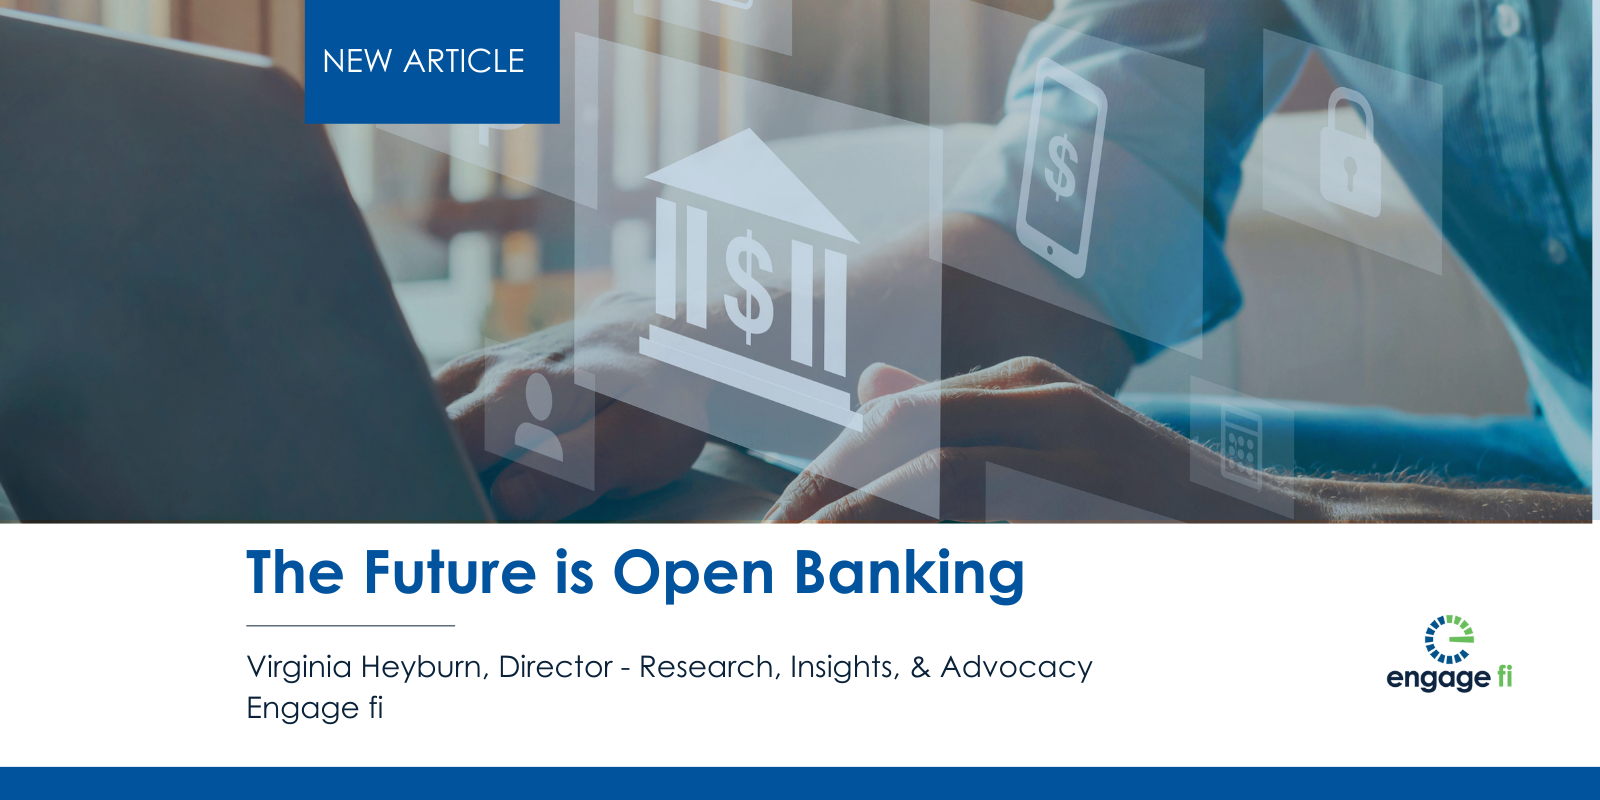 The Future is Open Banking